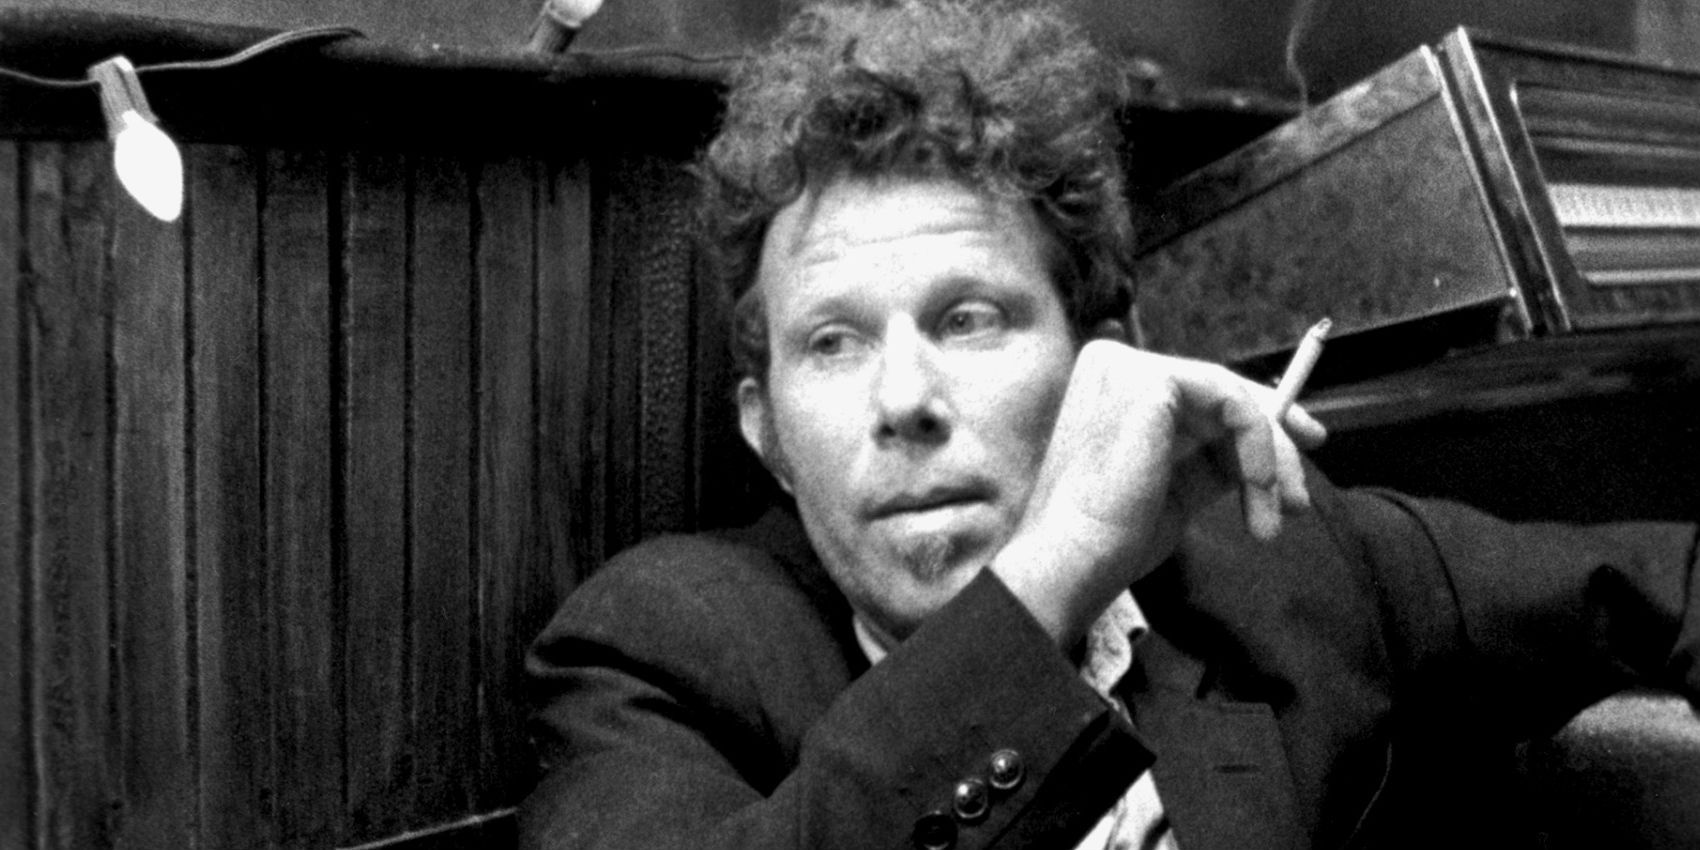 Tom Waits in Down by Law